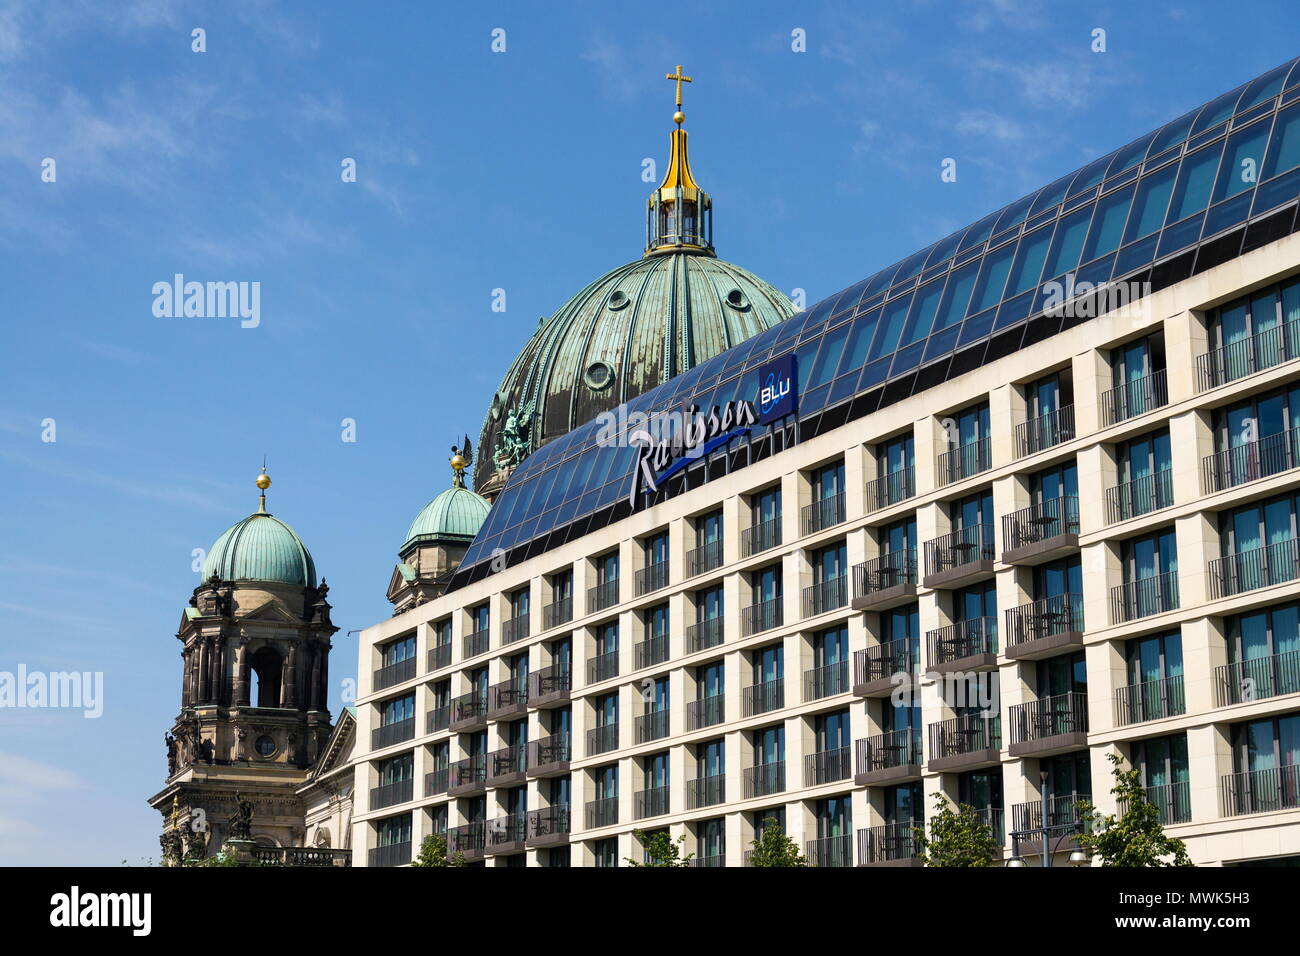 BERLIN, GERMANY - MAY 15 2018: Radisson Blu hotels and resorts logo on the building of hotel with Berlin Cathedral, Berliner Dom in background on May  Stock Photo